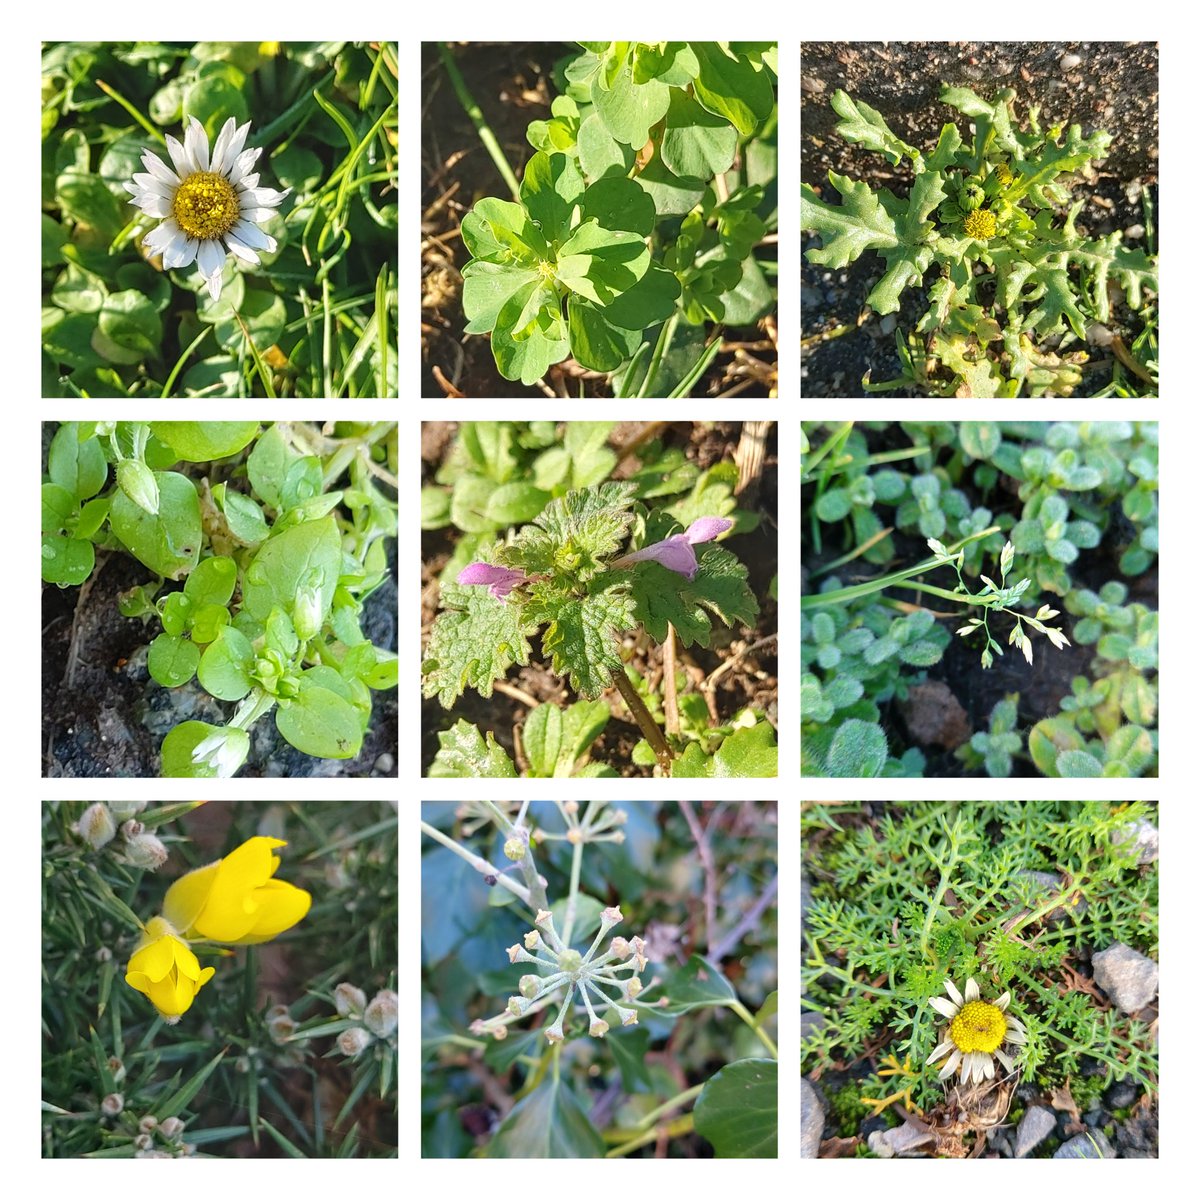 2nd day of my #NewYearPlantHunt in VC 52 #Anglesey managed to find 9 species today
#wildflowerhour